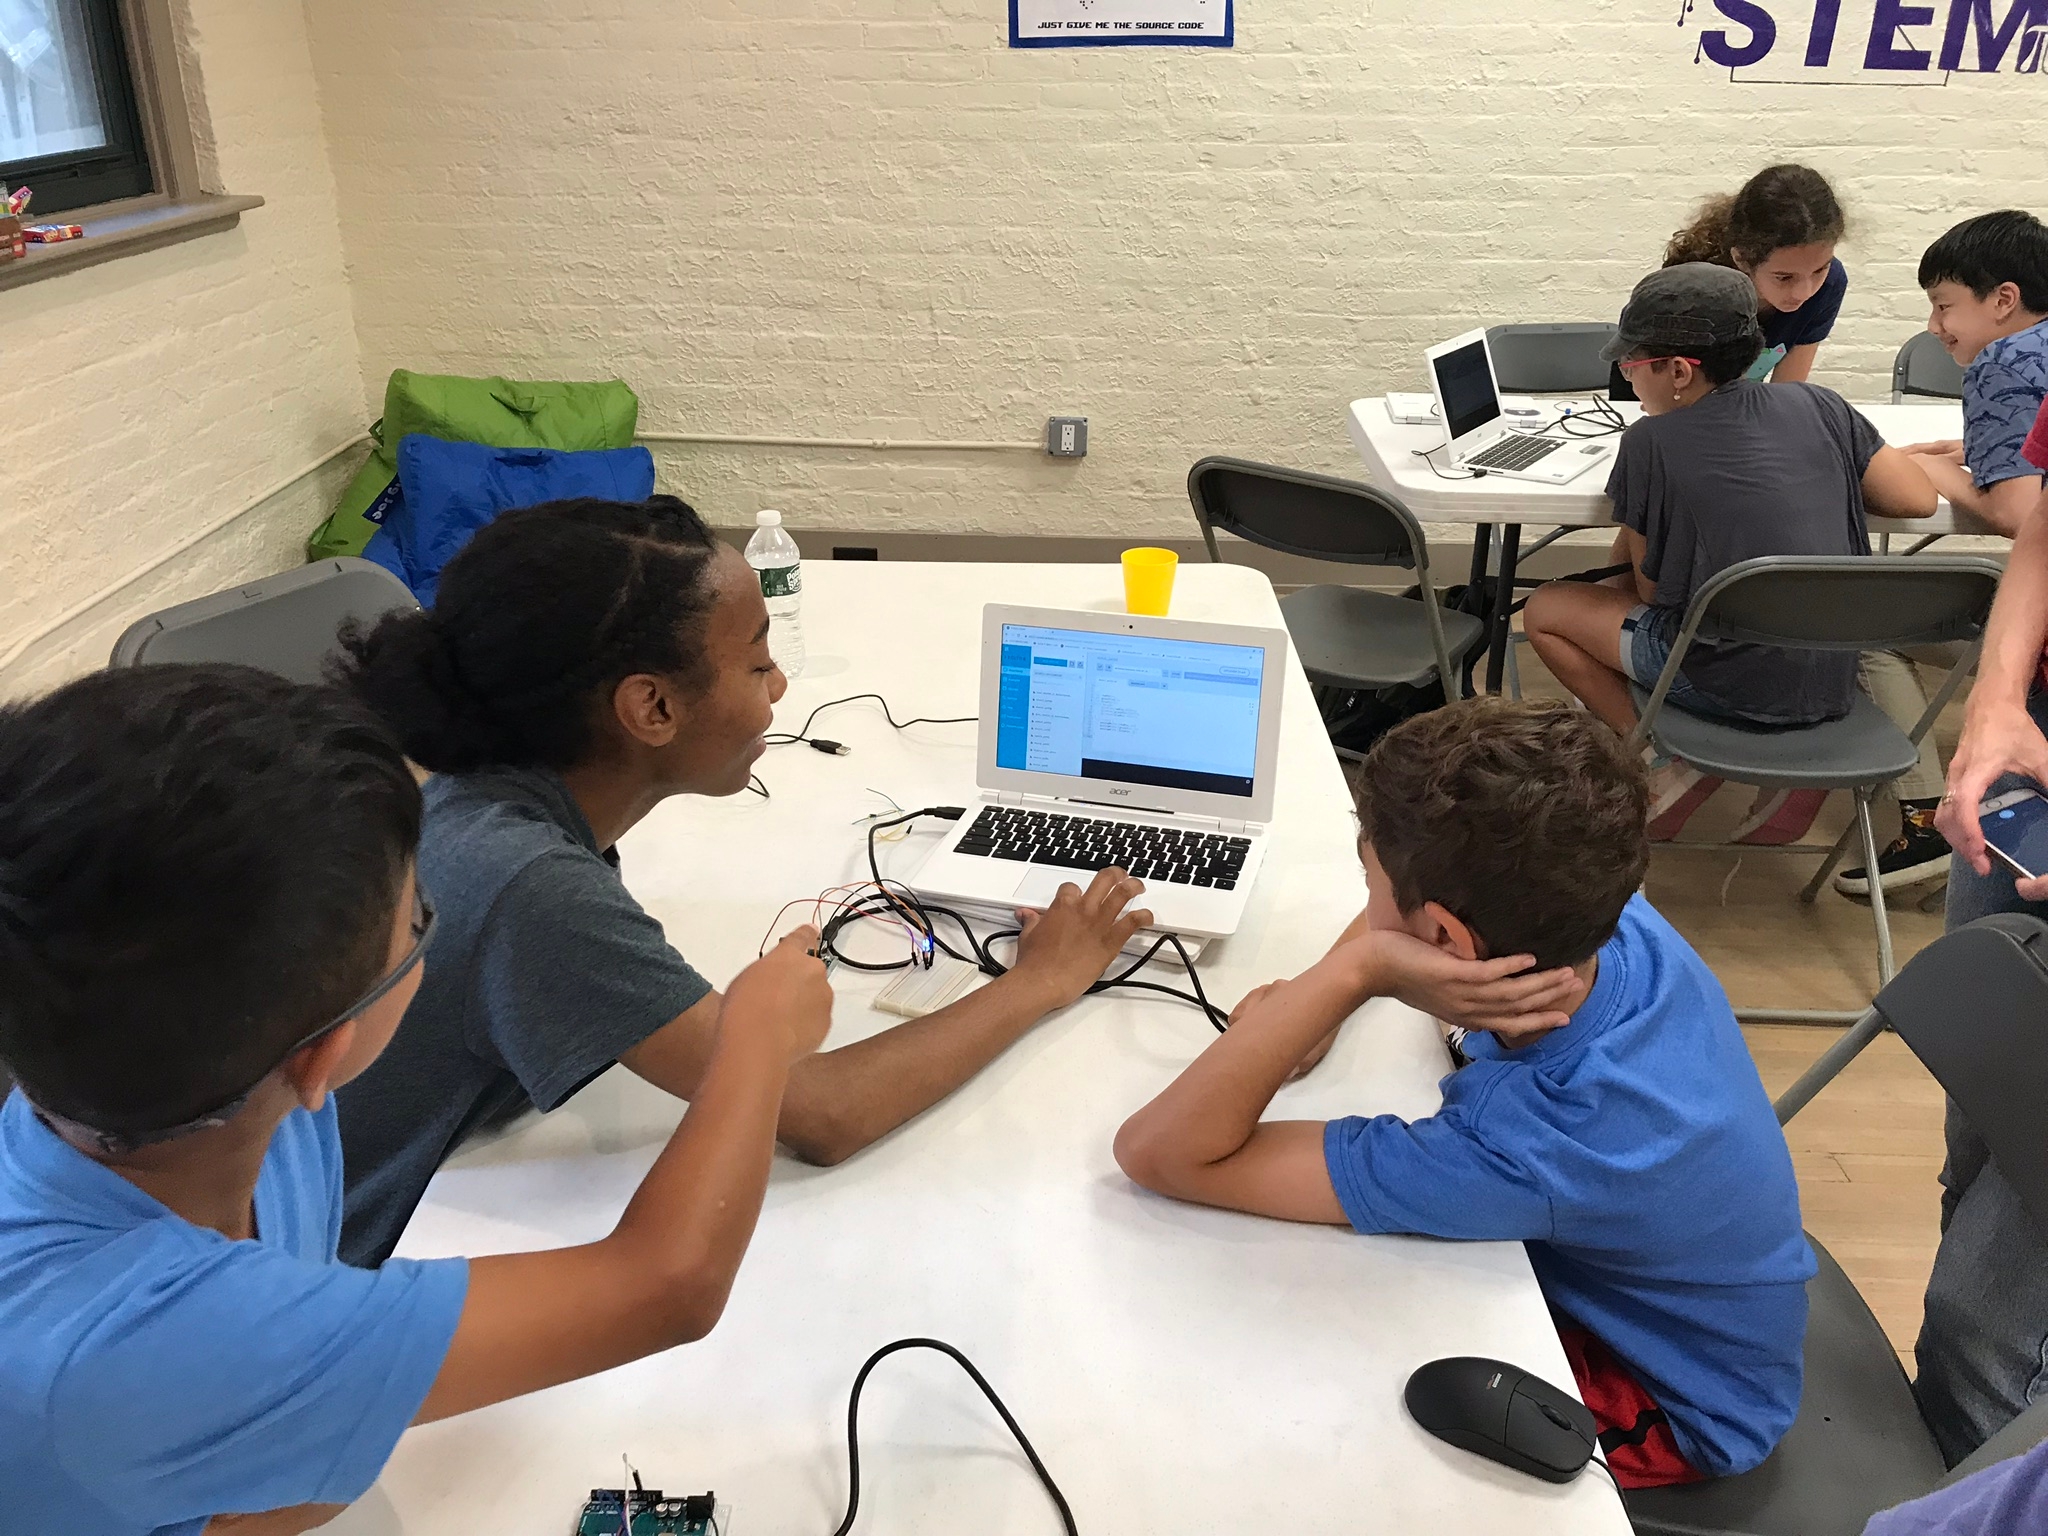 Kids coding together on the computer